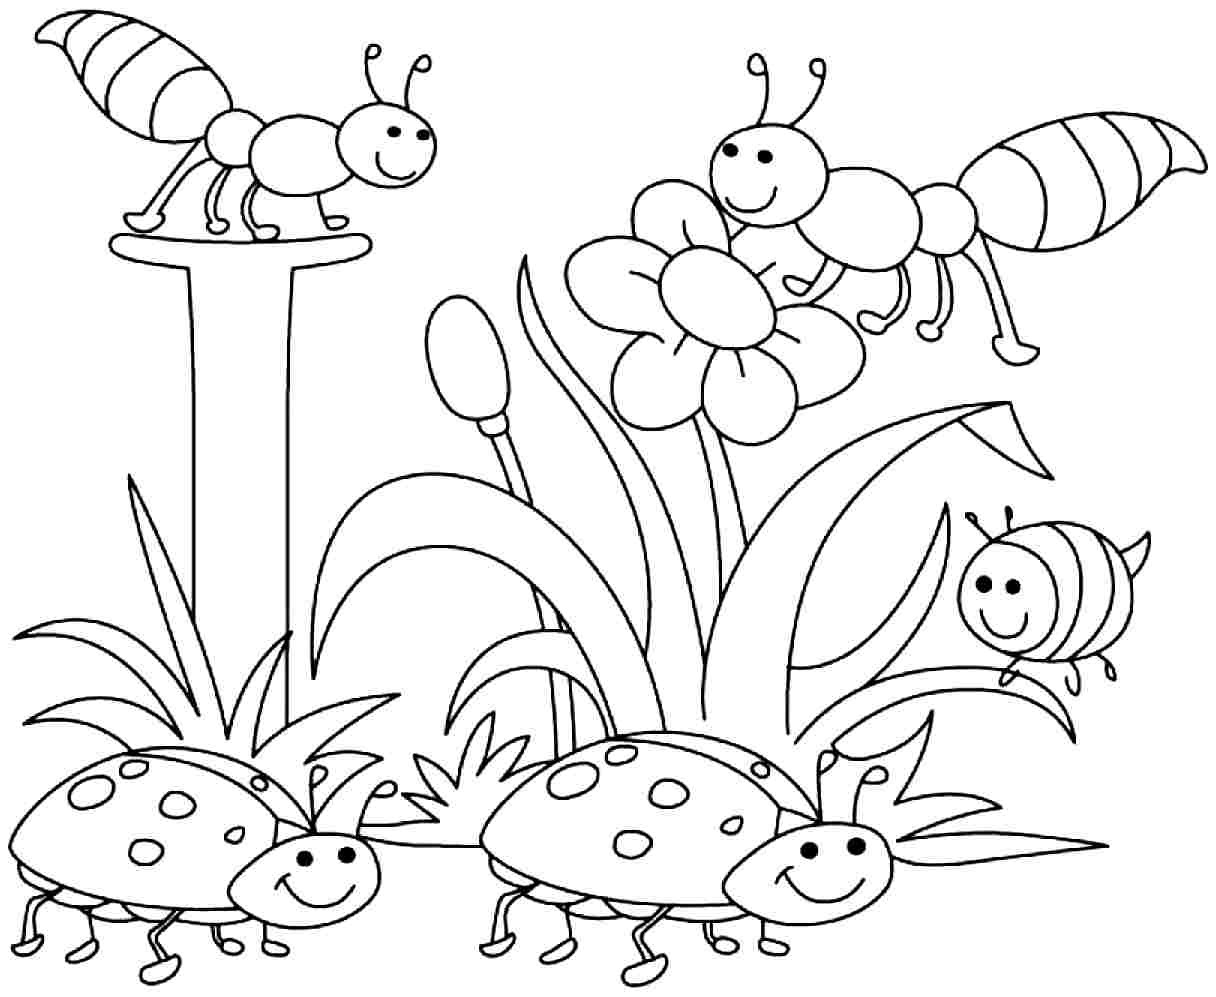 Kids Spring Coloring Pages
 5 Best of Spring Season Coloring Pages Printable